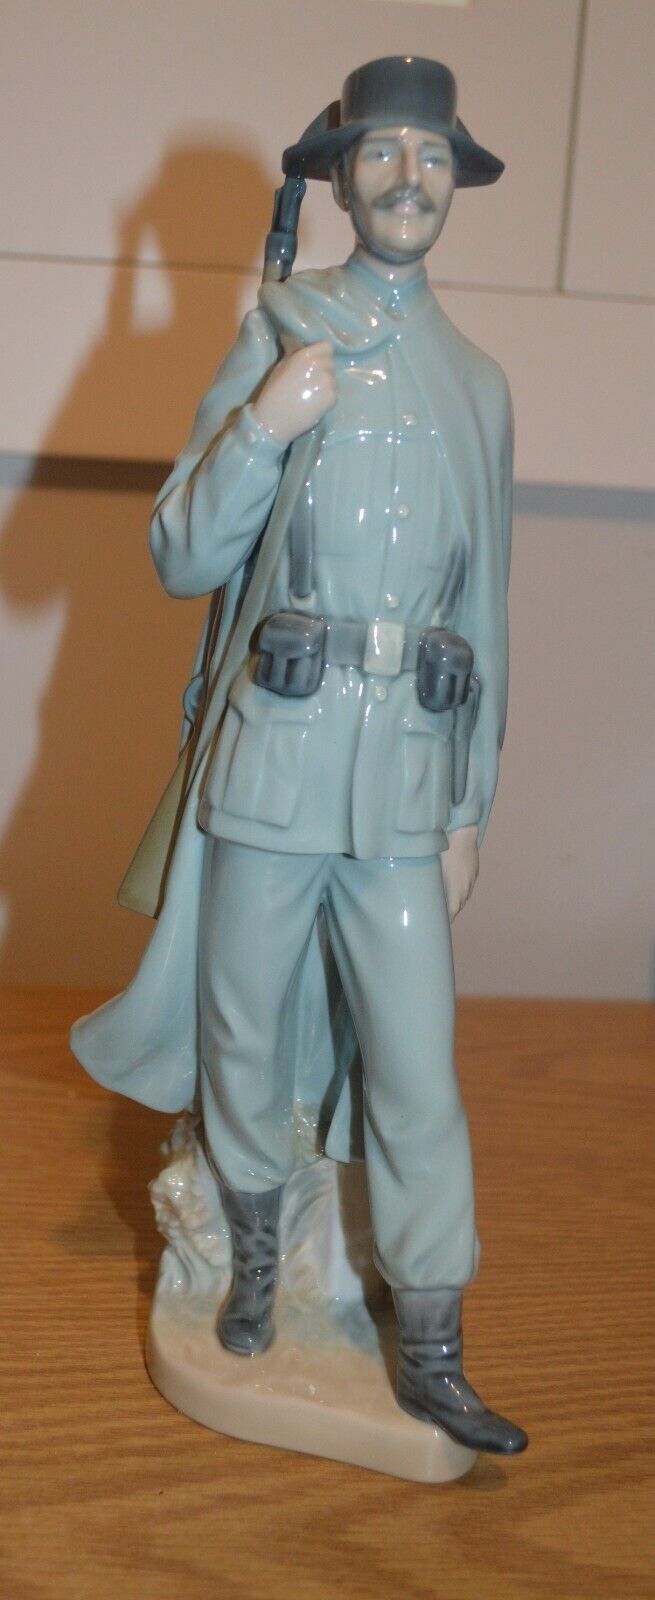 Primary image for Spanish Soldier Lladro Figurine, 11-3/4” tall, KM6